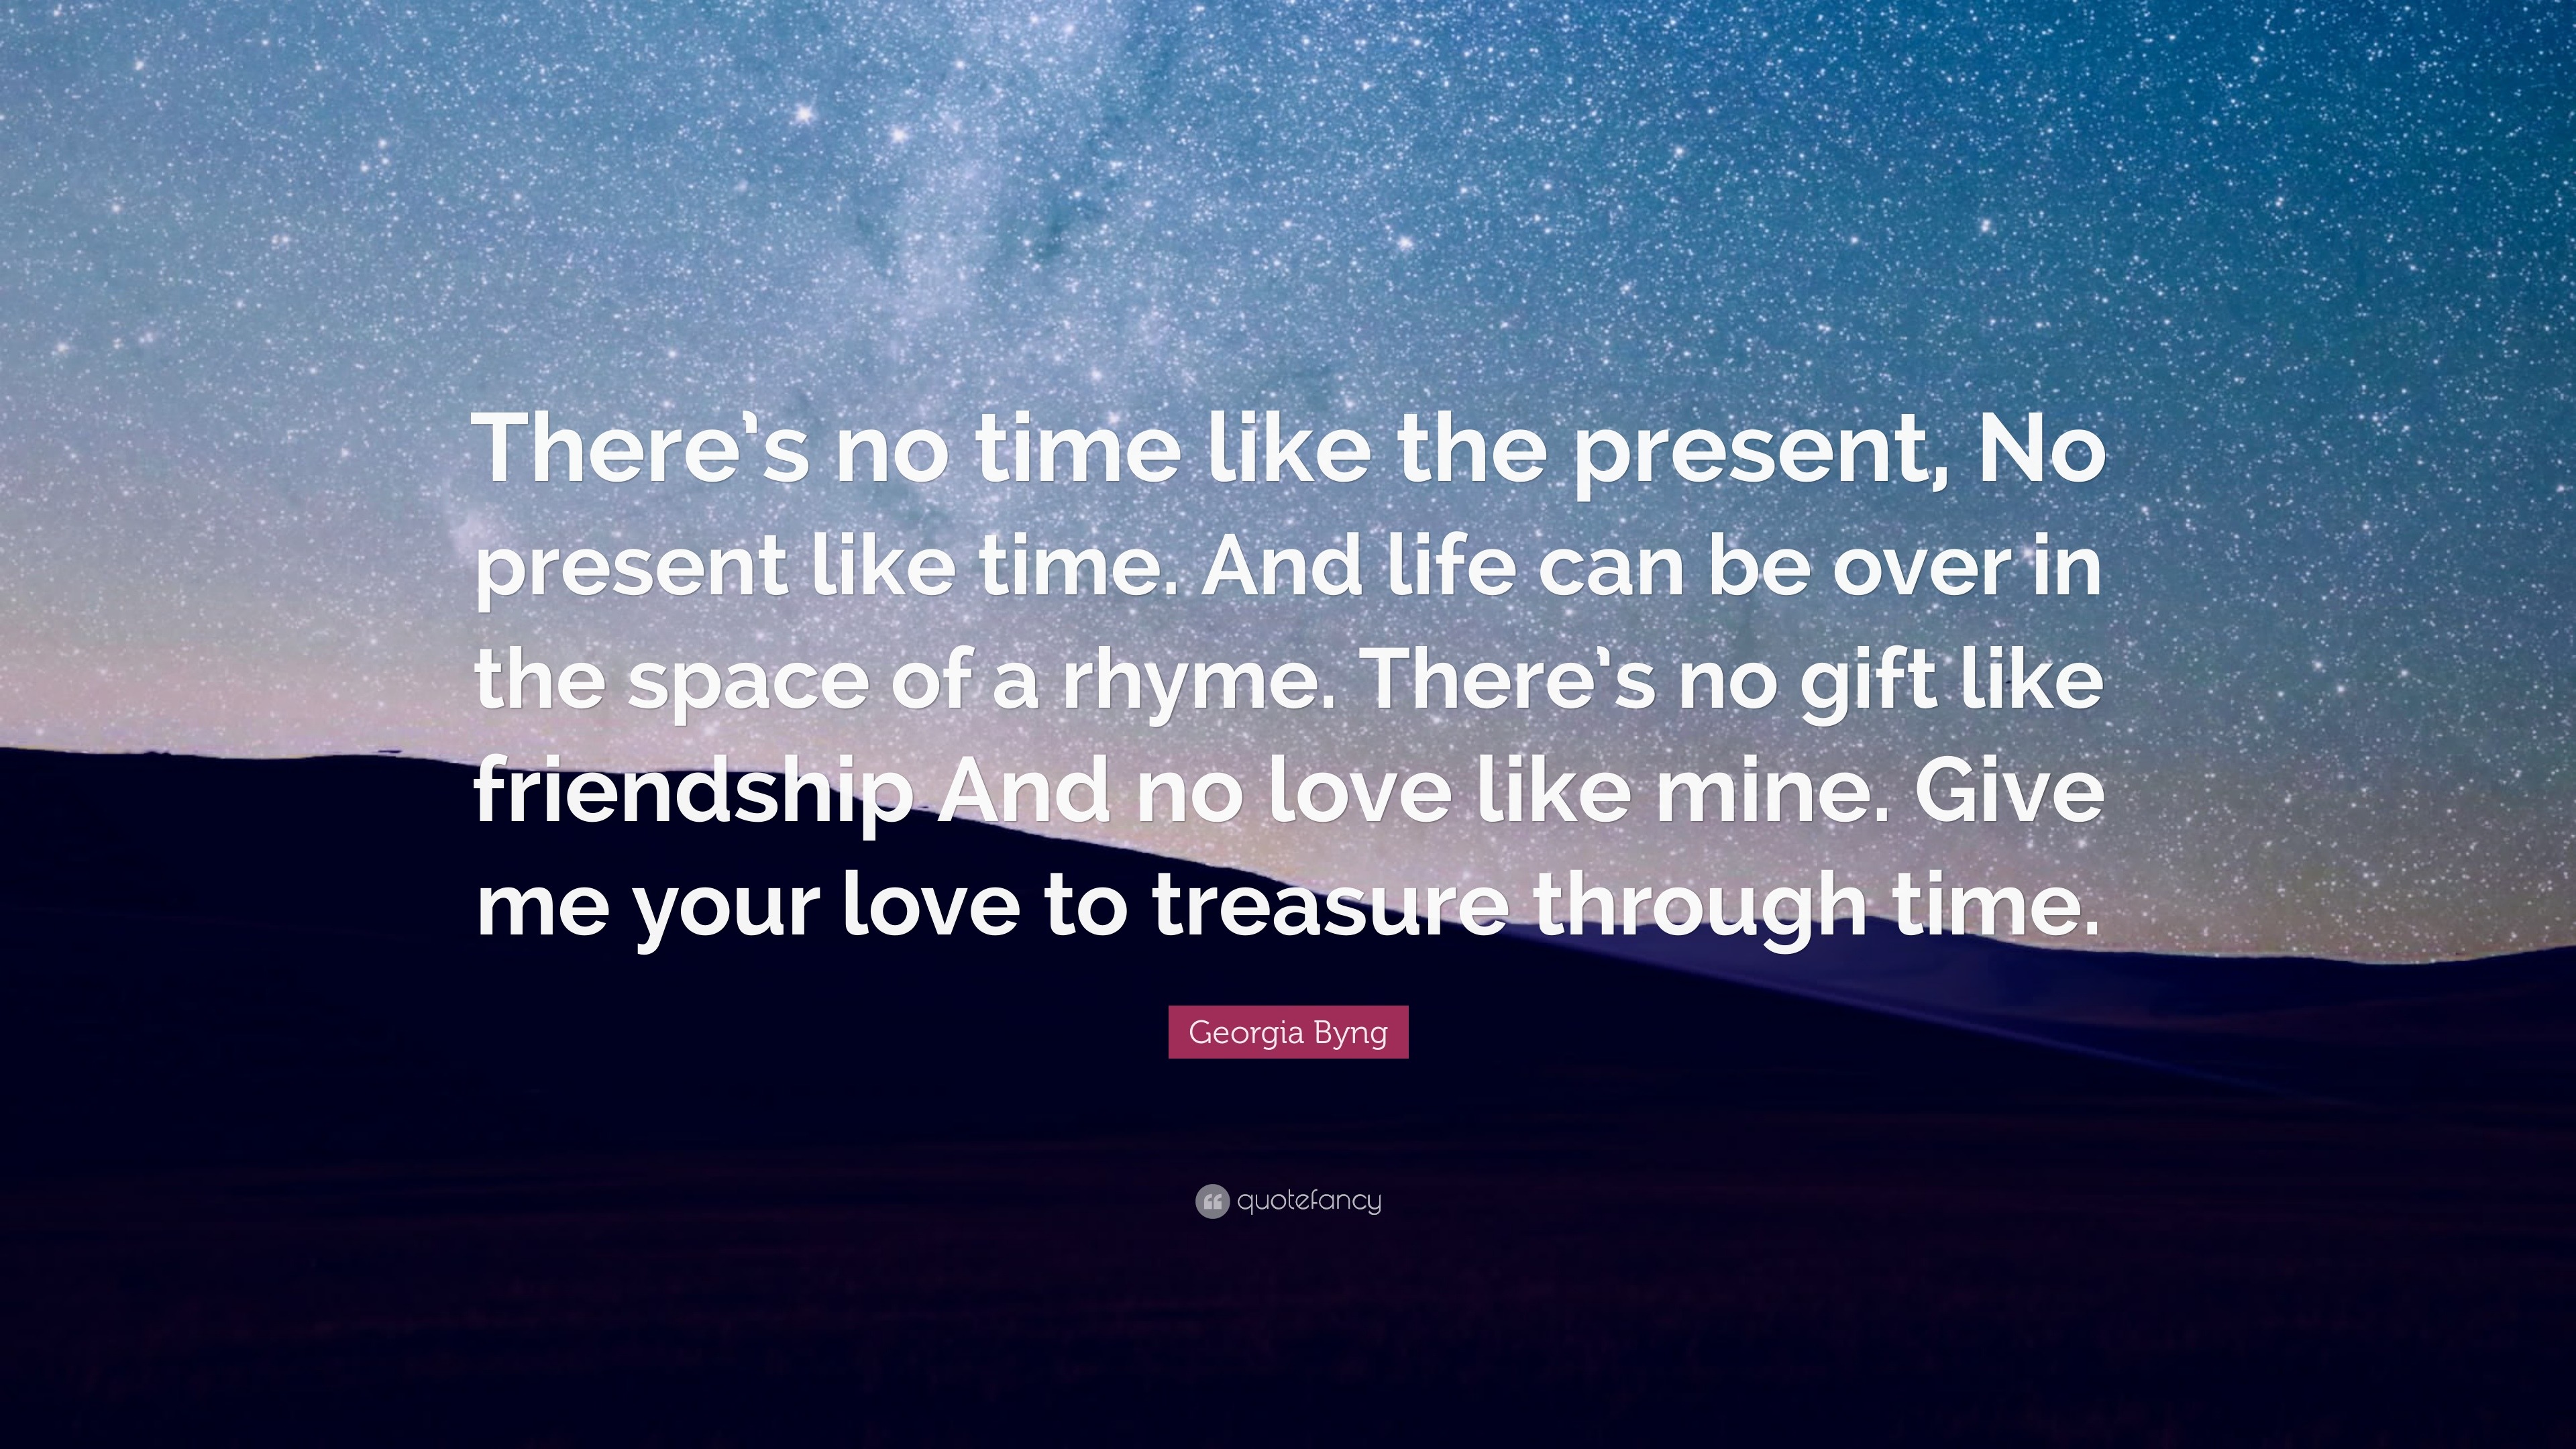 Georgia Byng Quote “There s no time like the present No present like time